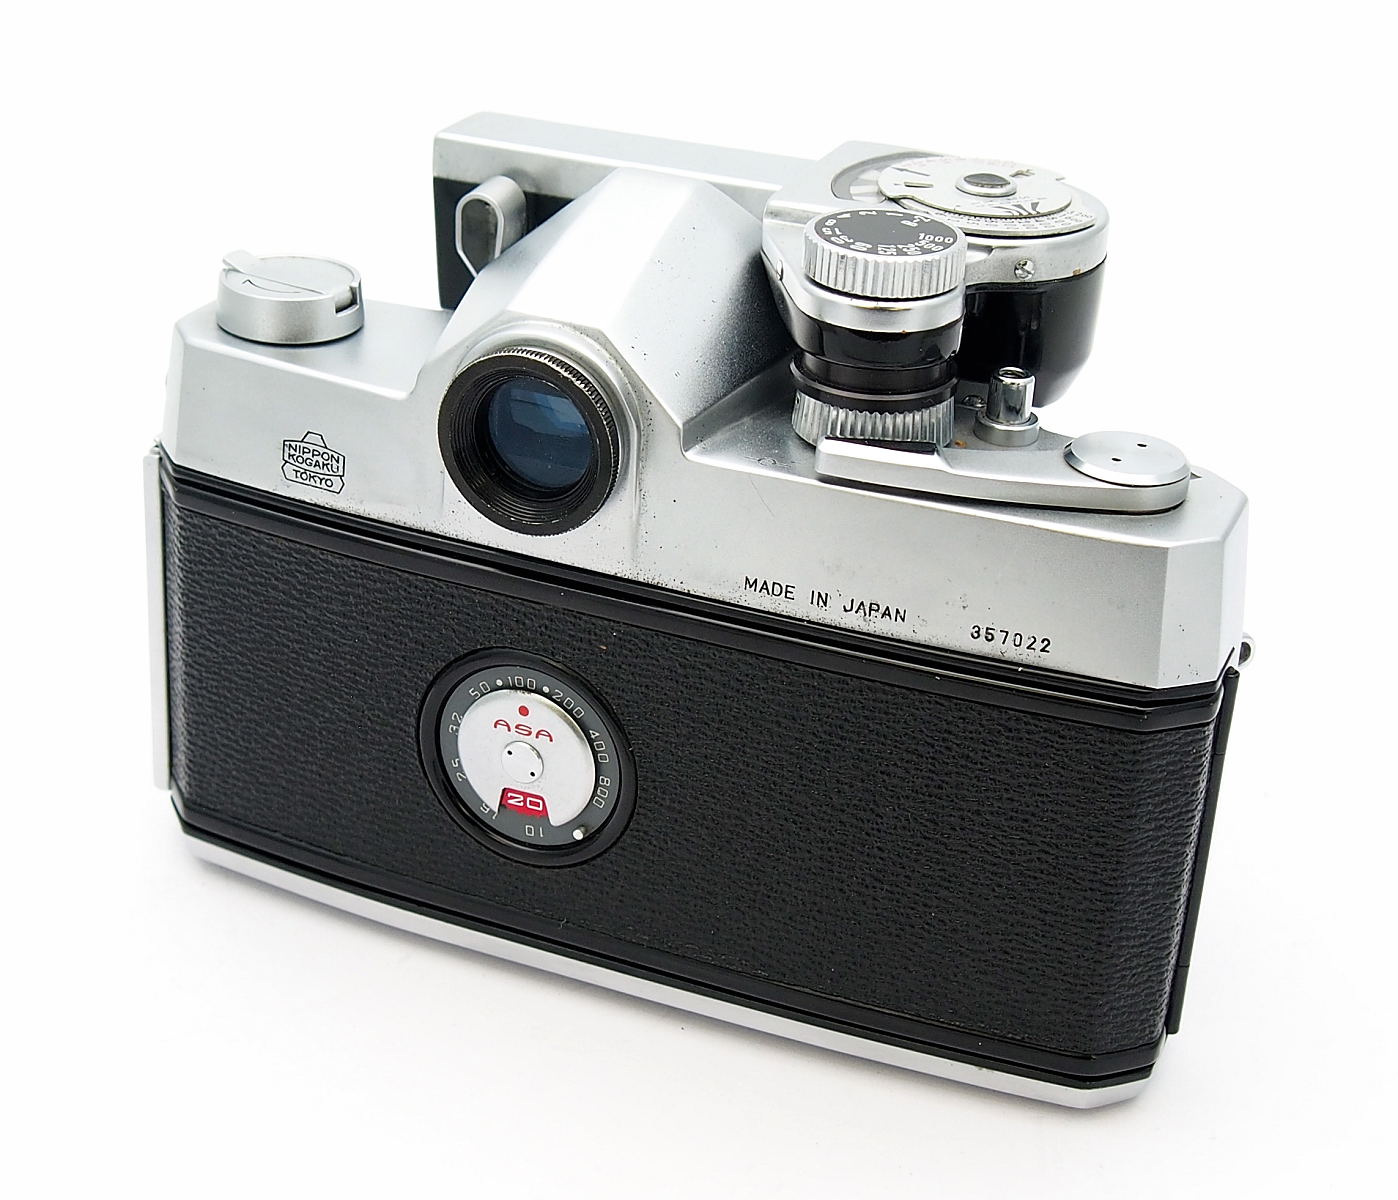 Nikkorex F, with Clip-on-Meter & 50mm F2 #9638